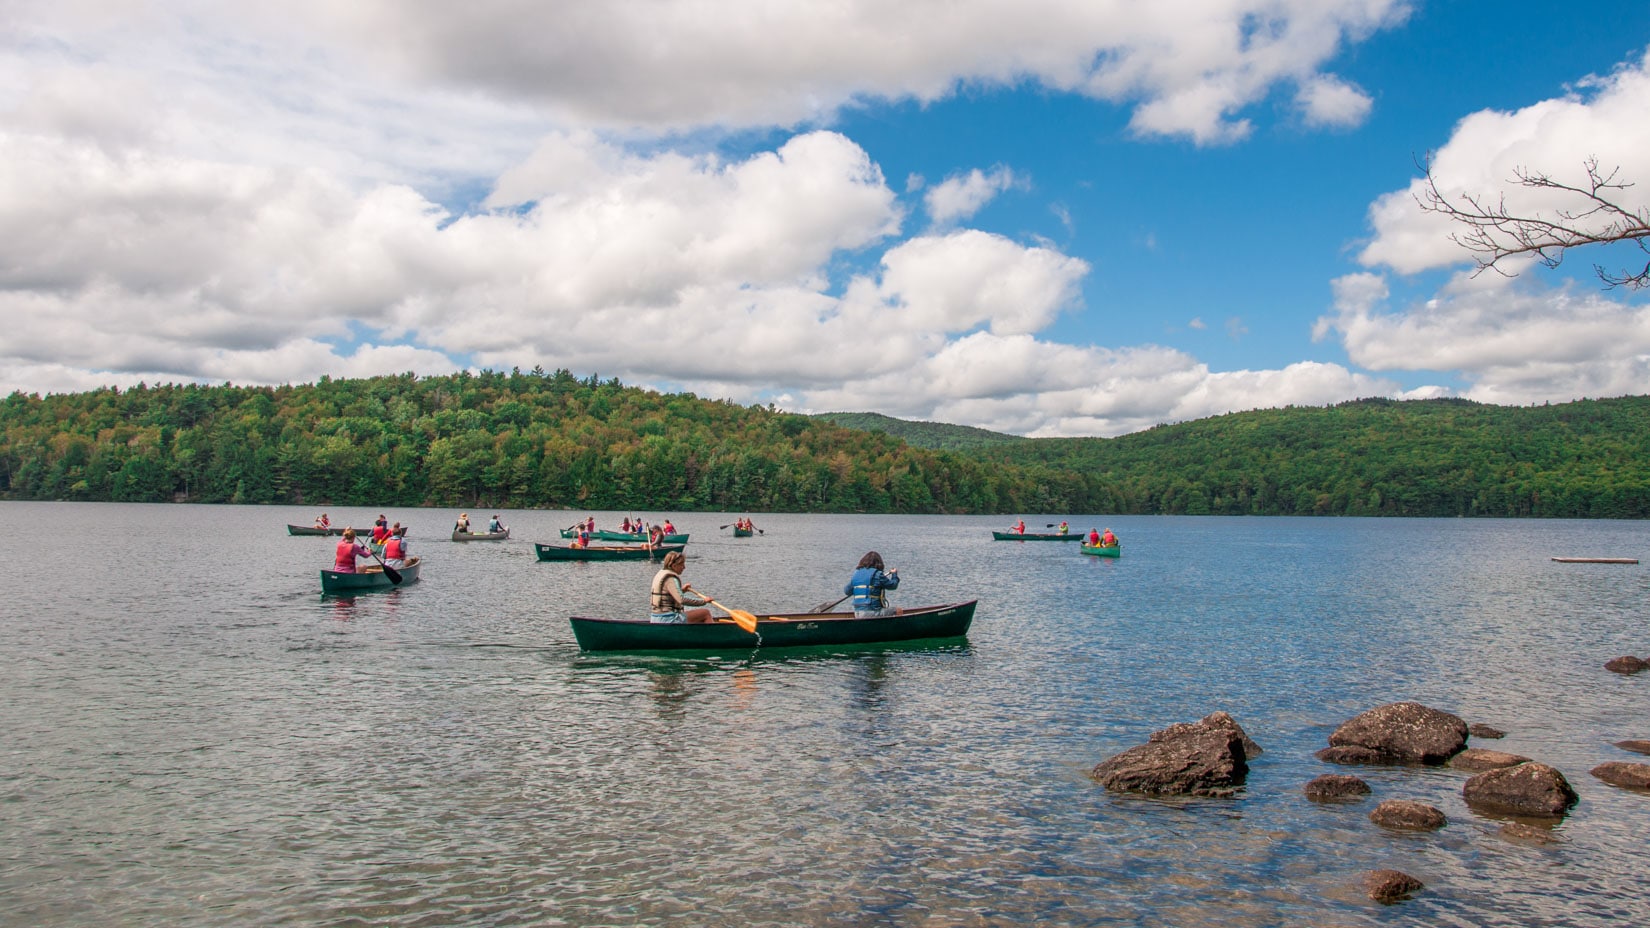 Campers exploring the lake in canoes.